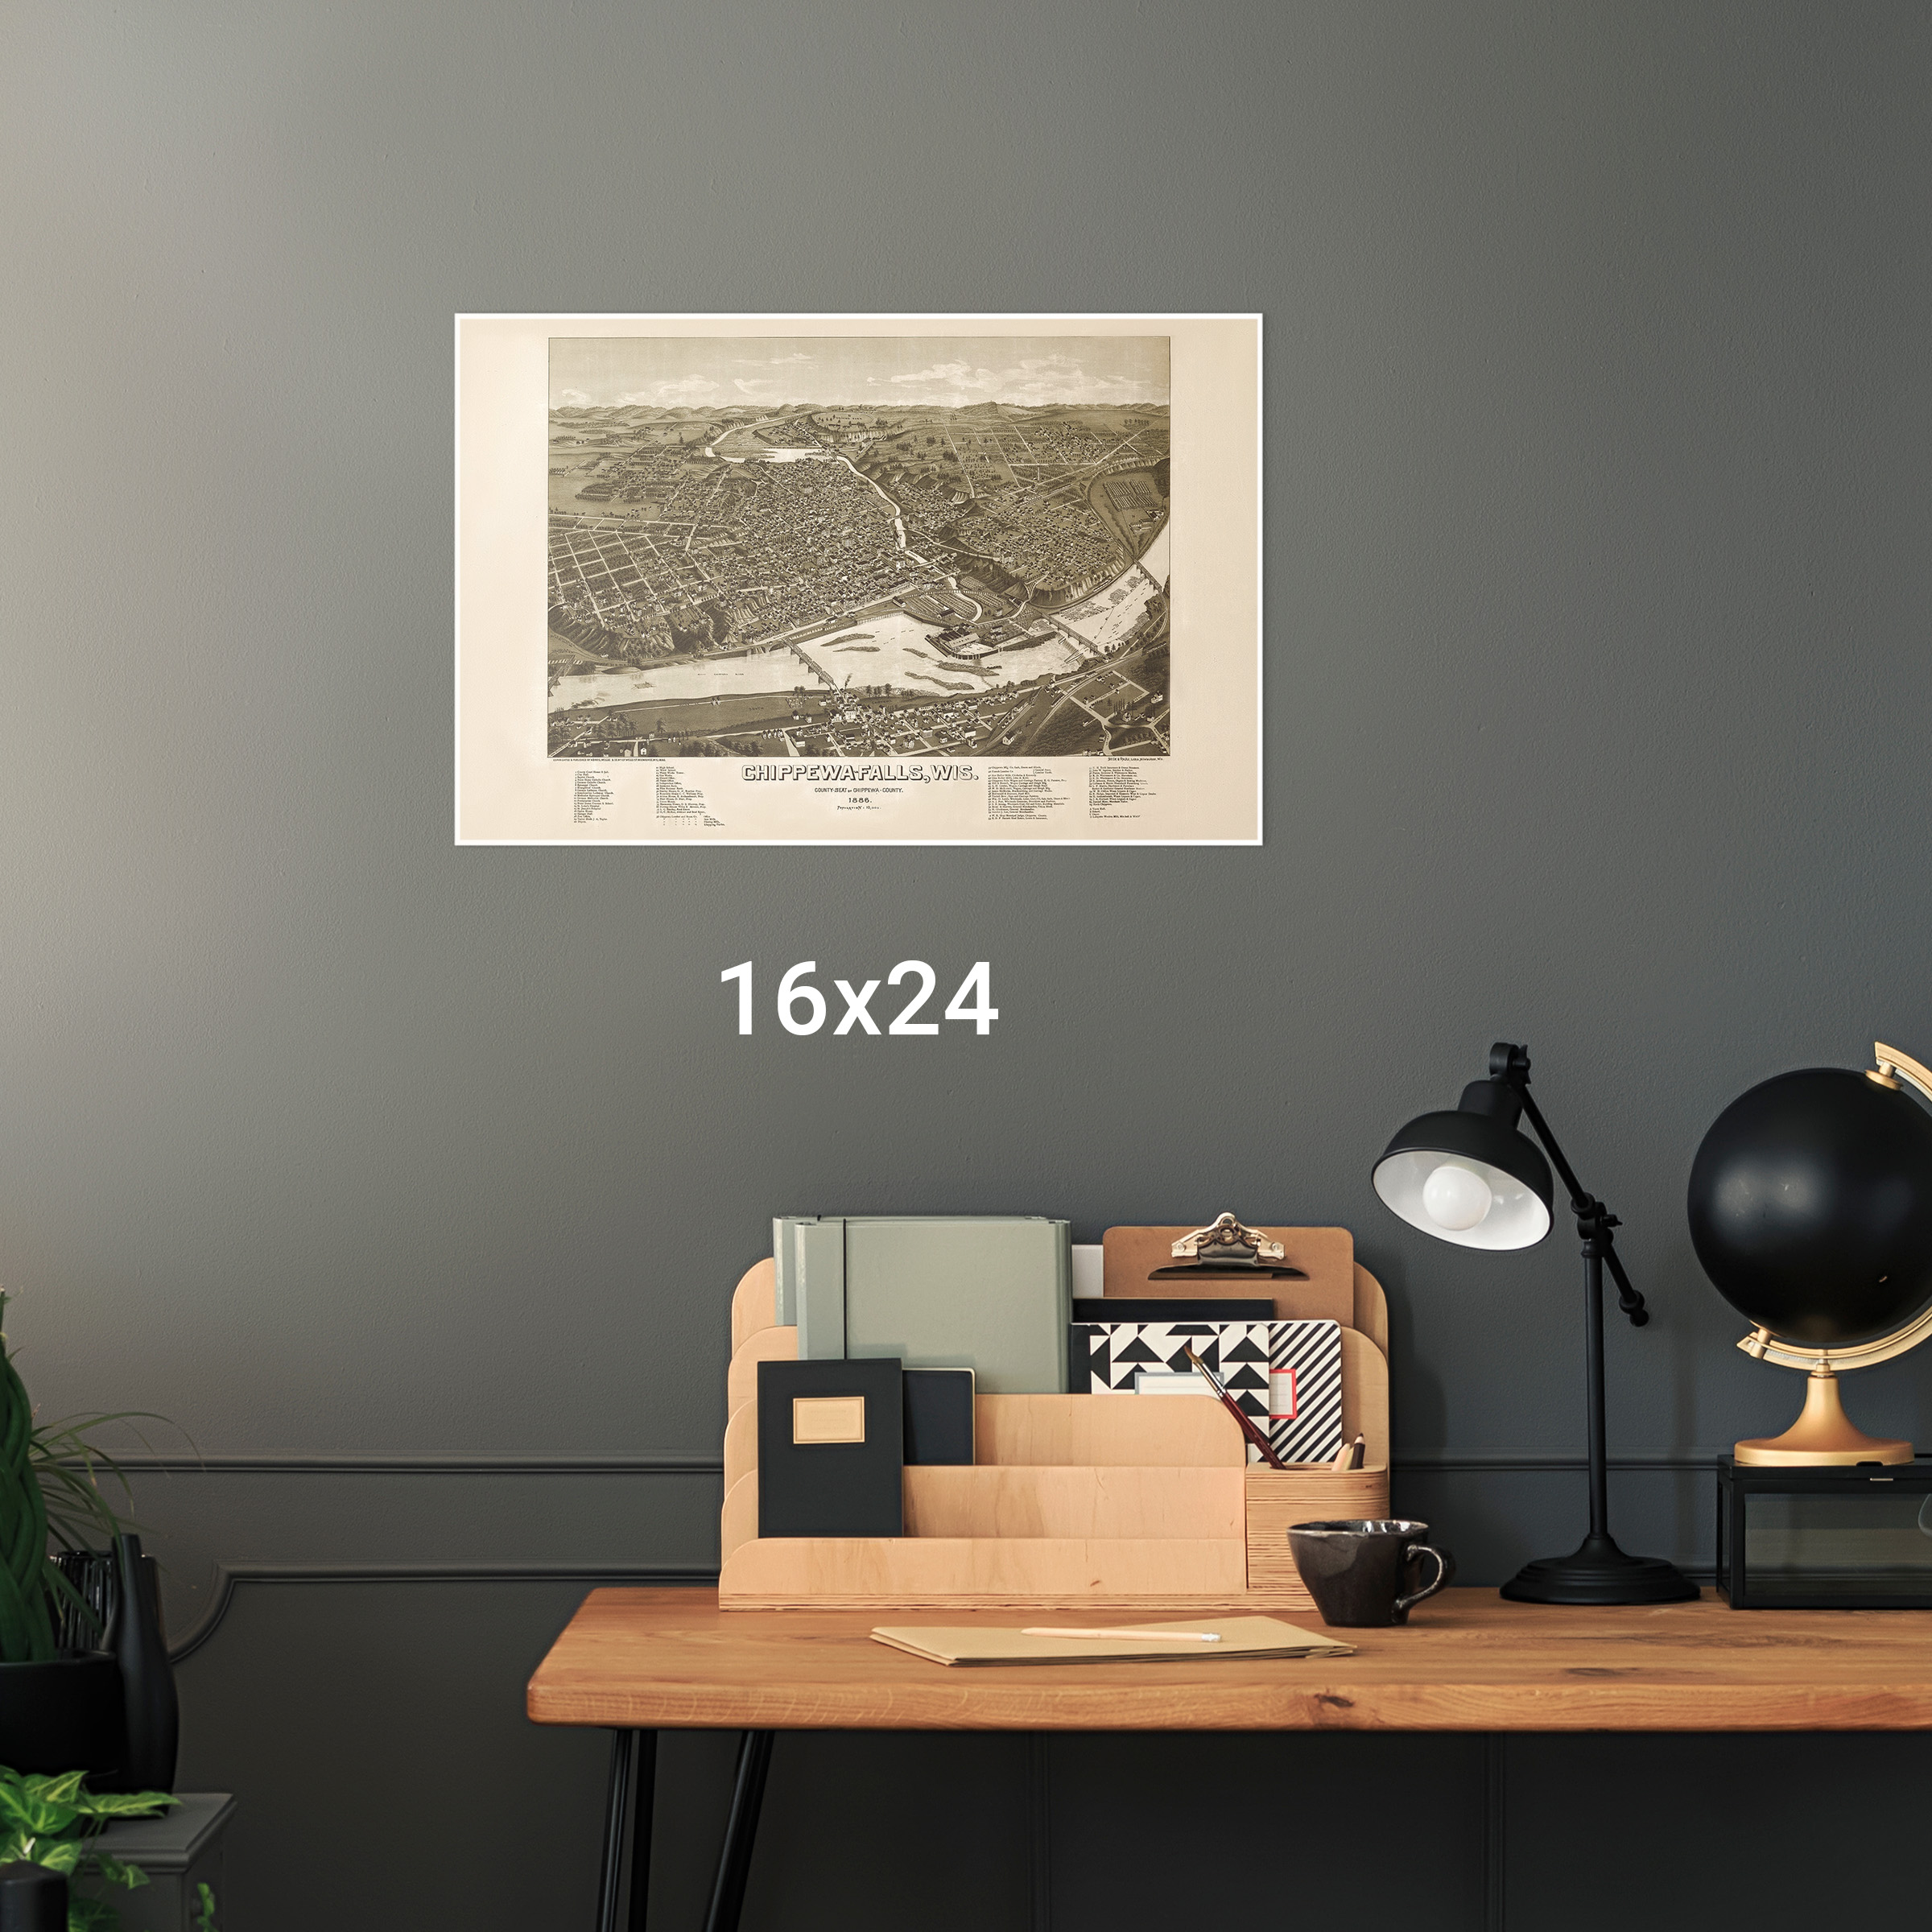 Amherst 1886 24x36 Giclee Gallery Print, Wall Decor Travel Poster - Panoramic Map Massachusetts -